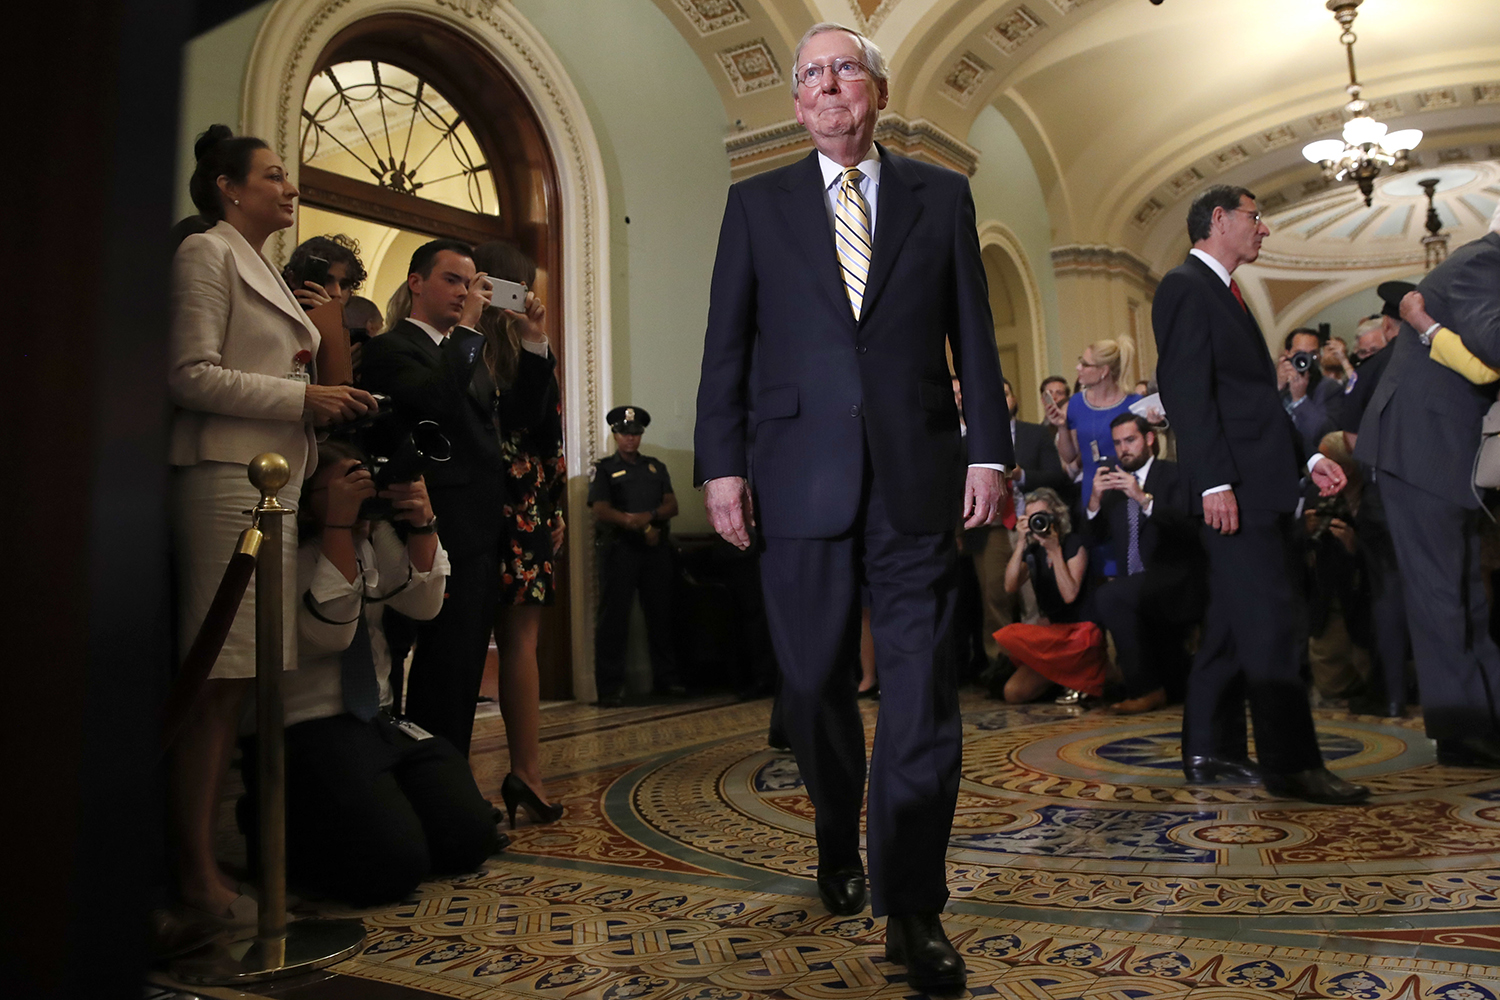 Senate Majority Leader Mitch McConnell of Ky., center, approaches the podium to talk to reporters on Capitol Hill in Washington, Tuesday, July 25, 2017, after Vice President Mike Pence broke a 50-50 tie to start debating Republican legislation to tear down much of the Obama health care law. (Jacquelyn Martin/AP)